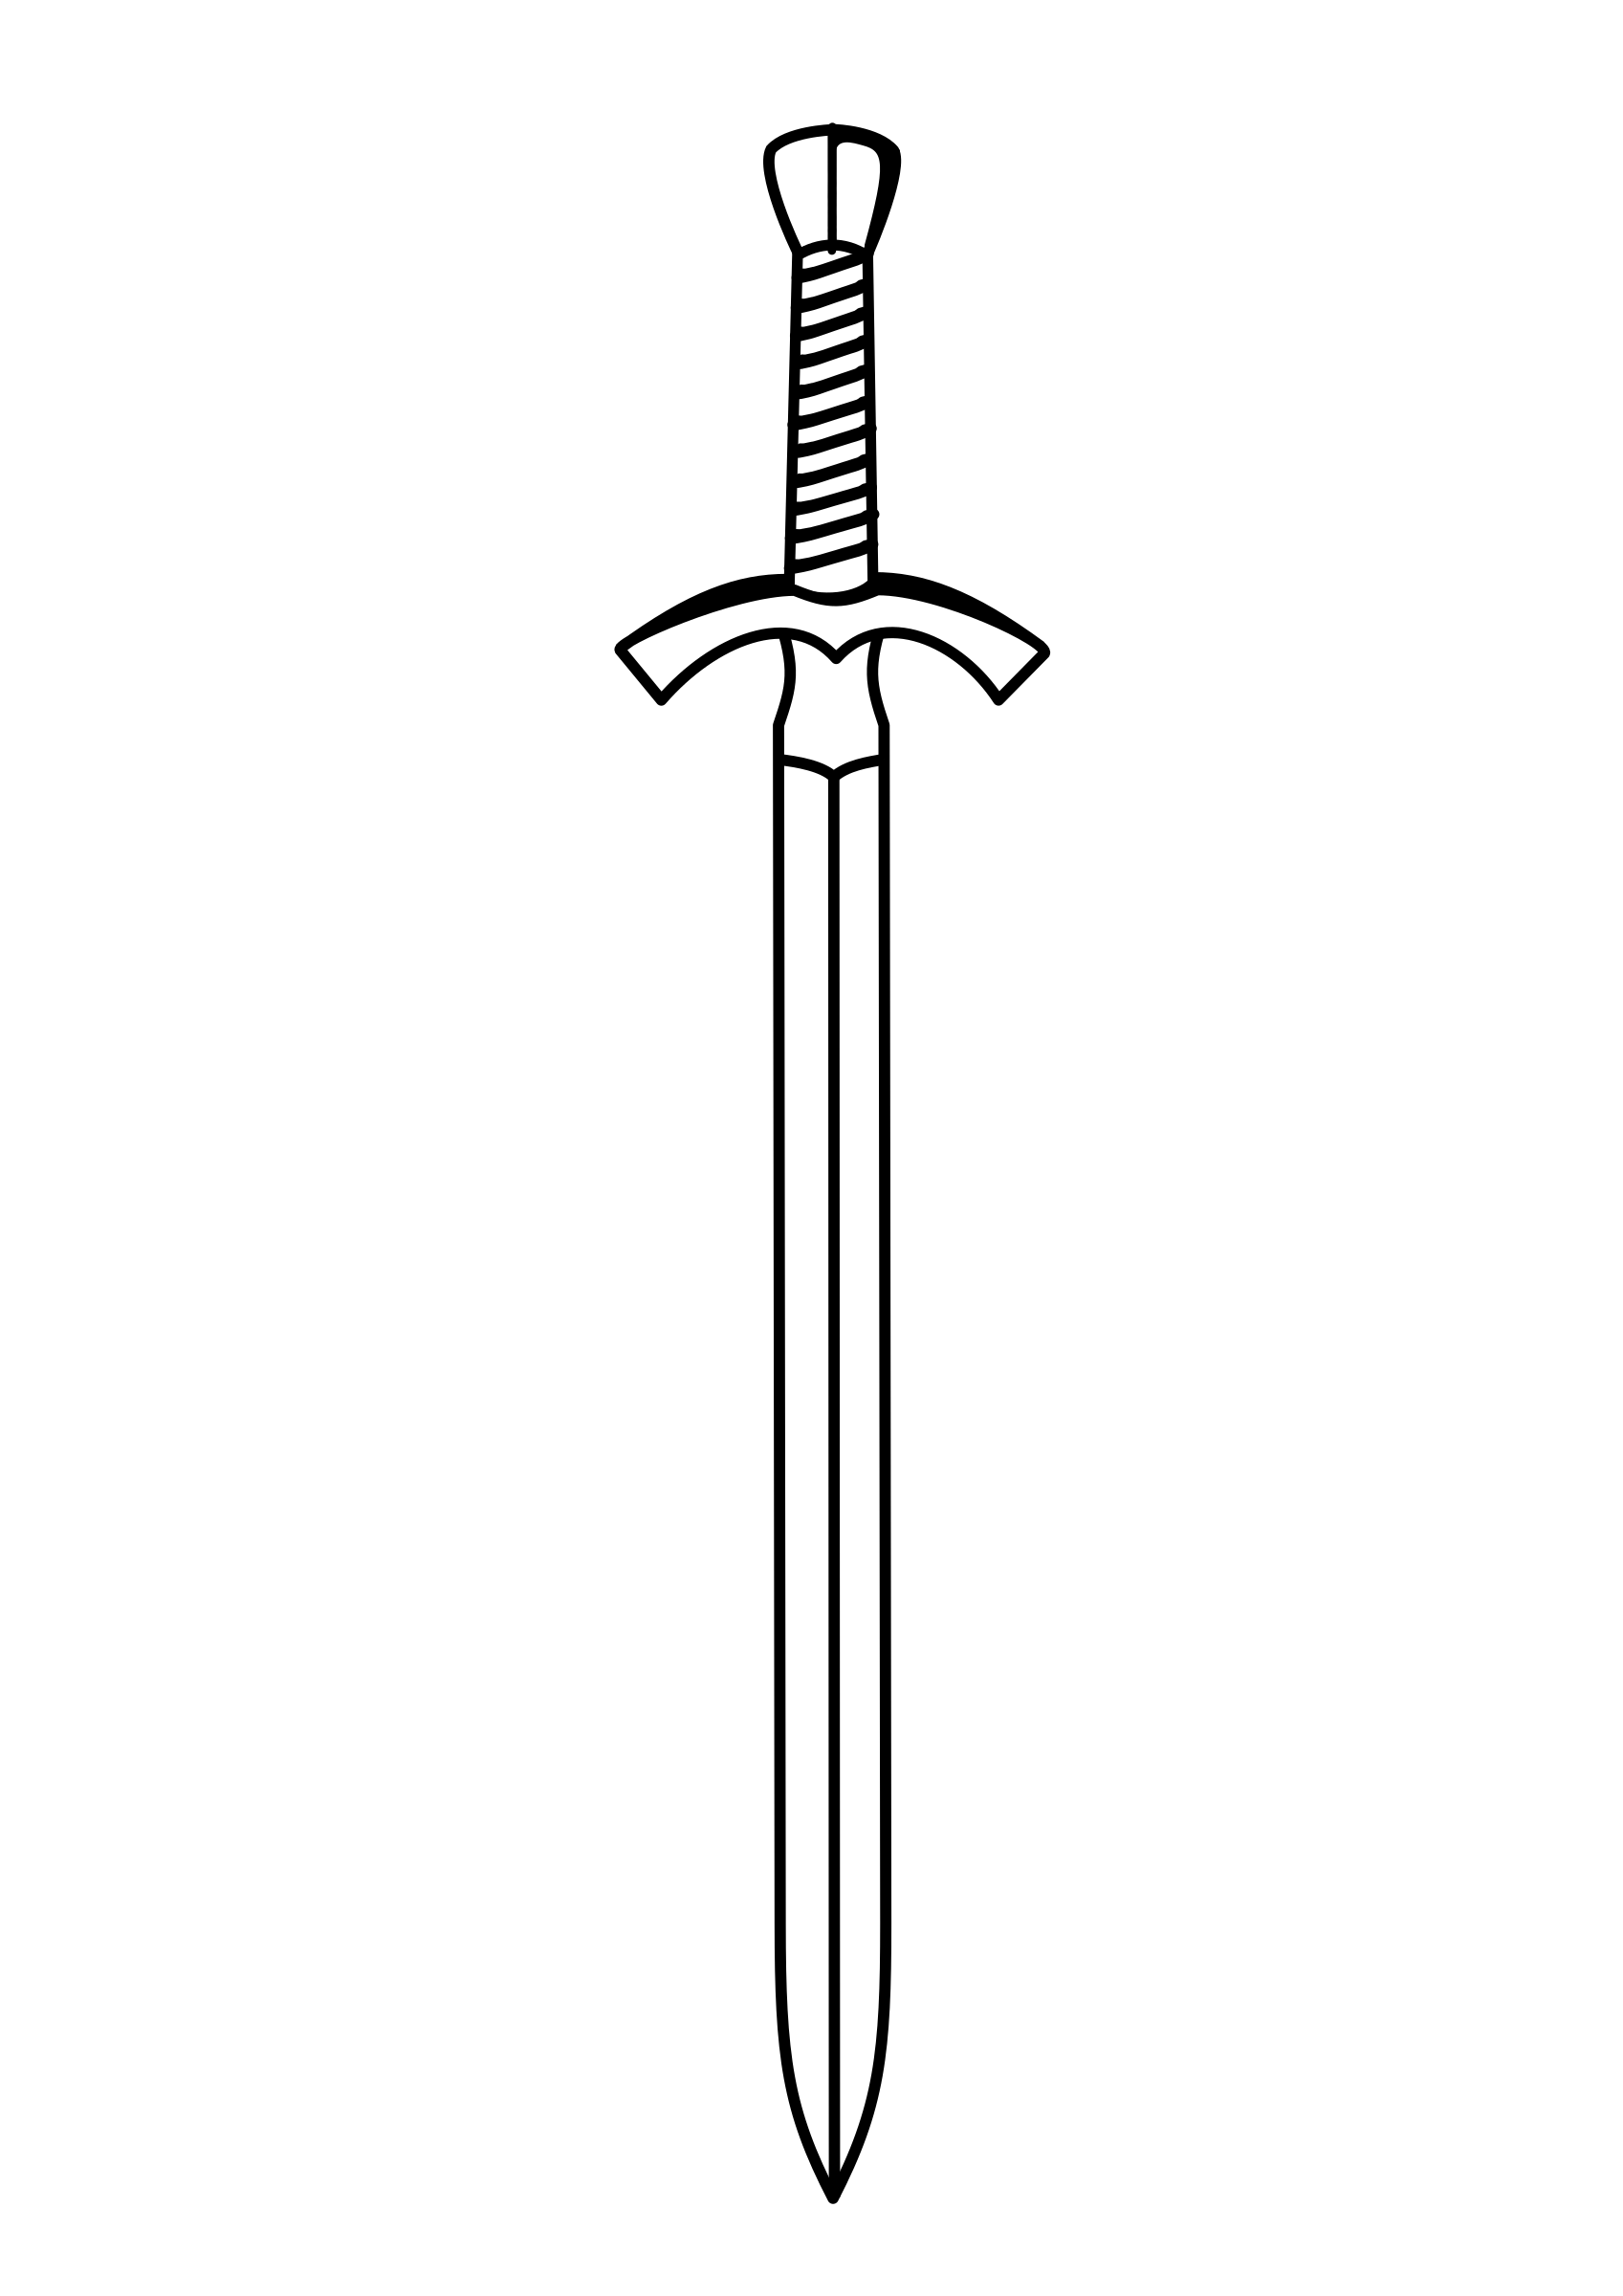 Big Image (Png) - Sword Black And White, Transparent background PNG HD thumbnail